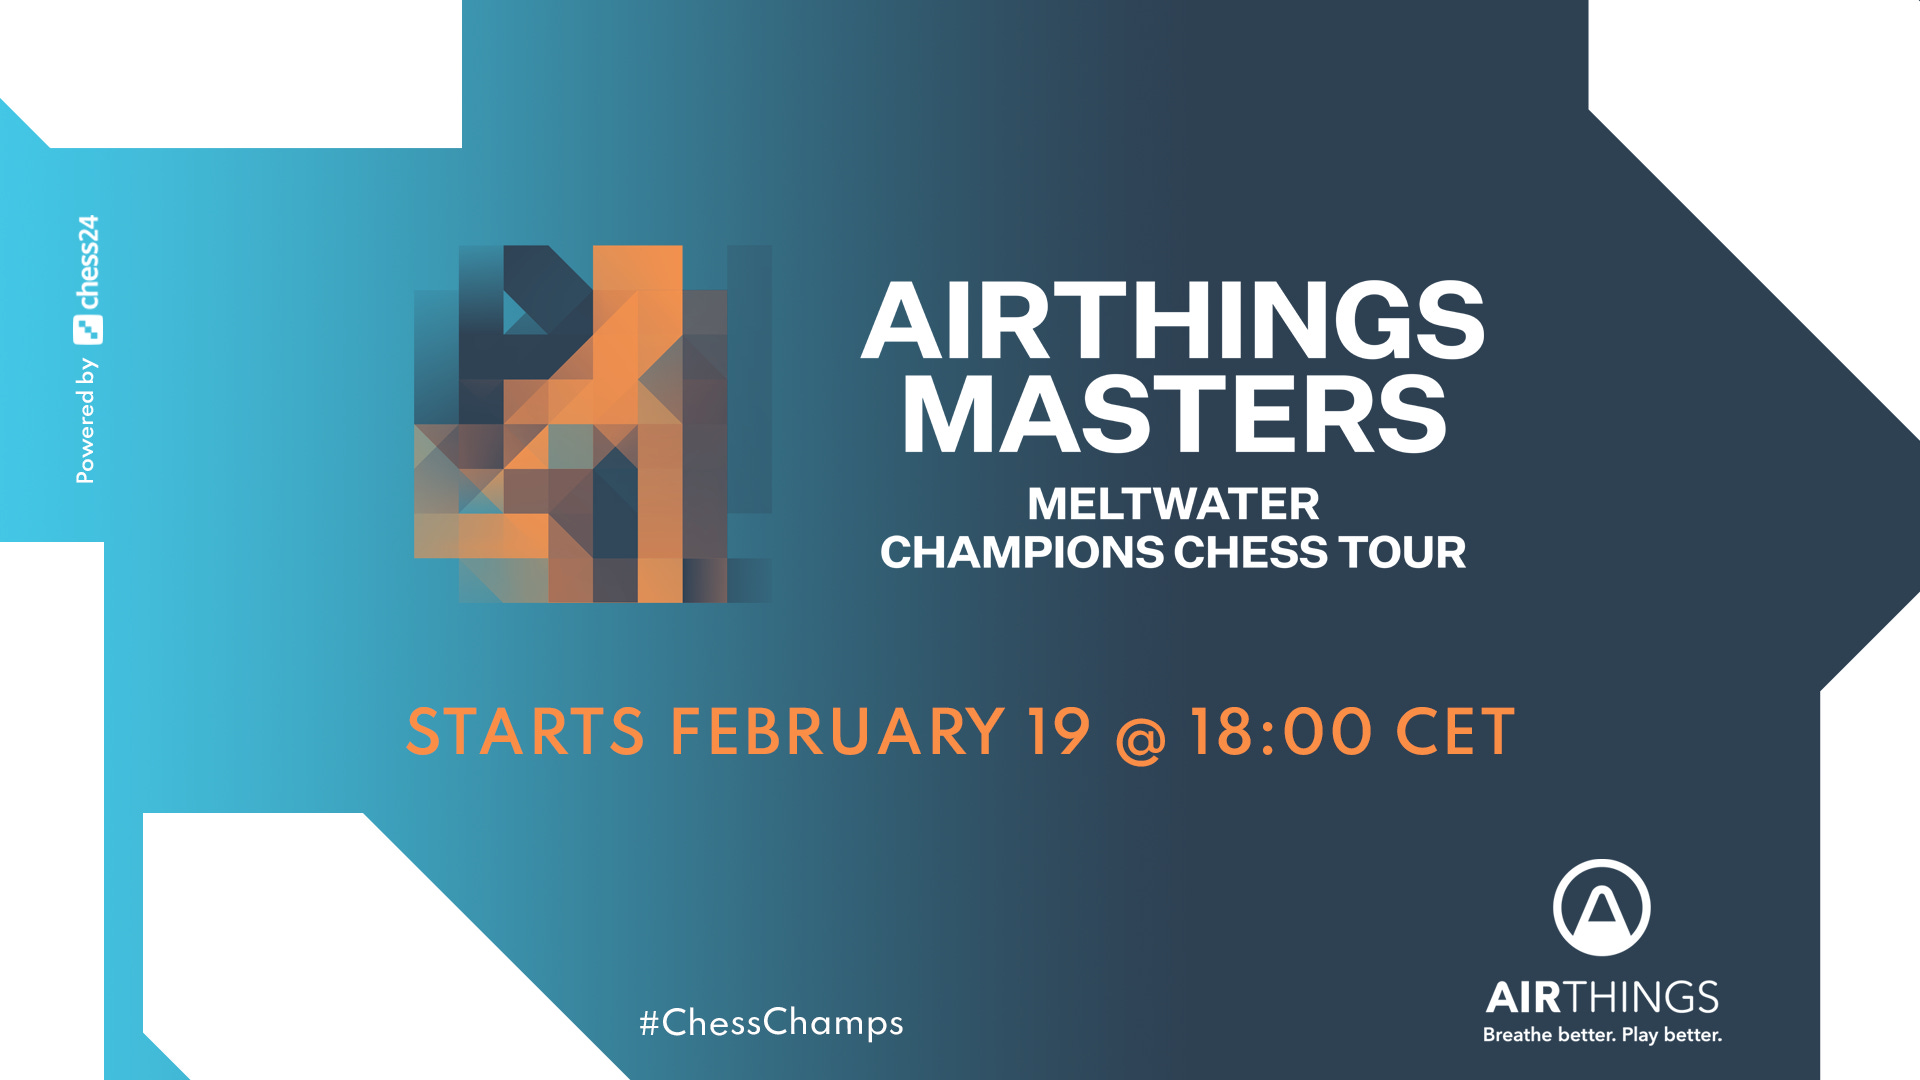 Airthings Masters kicks off $2 million Champions Chess Tour